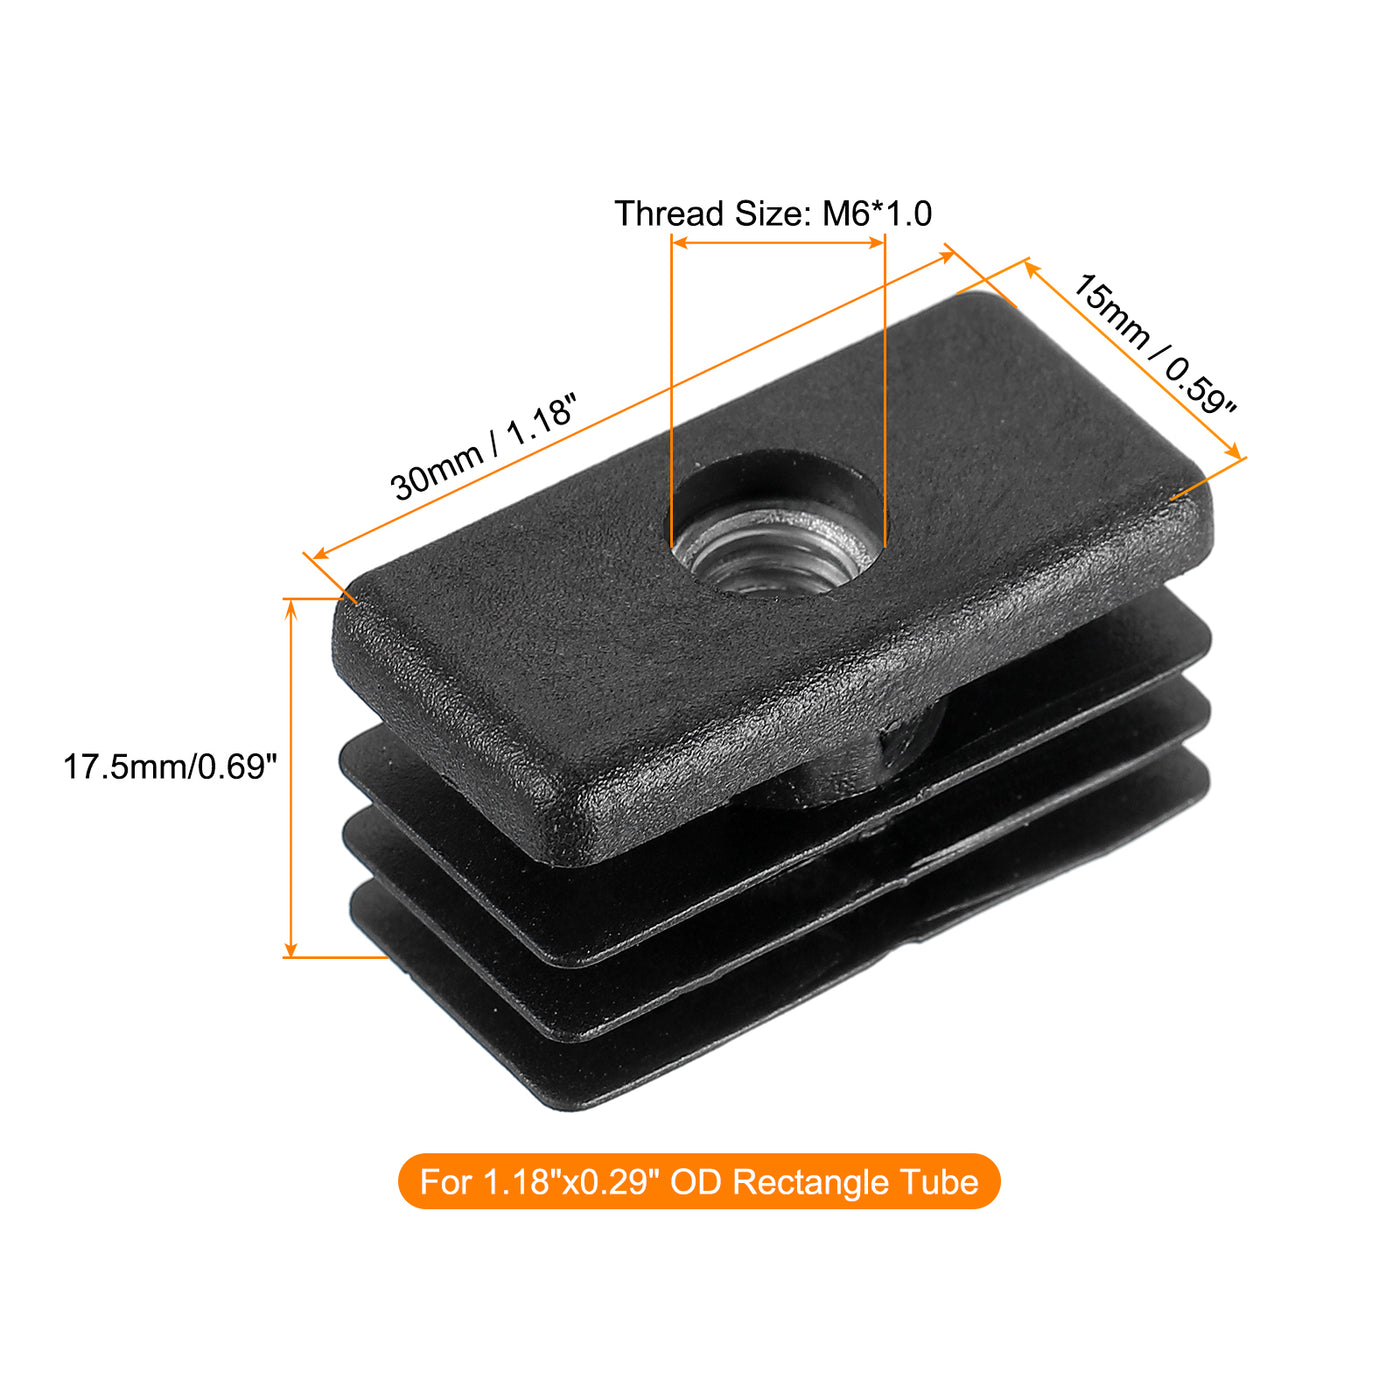 uxcell Uxcell 16Pcs 1.18"x0.59" Caster Insert with Thread, Rectangle M6 Thread for Furniture